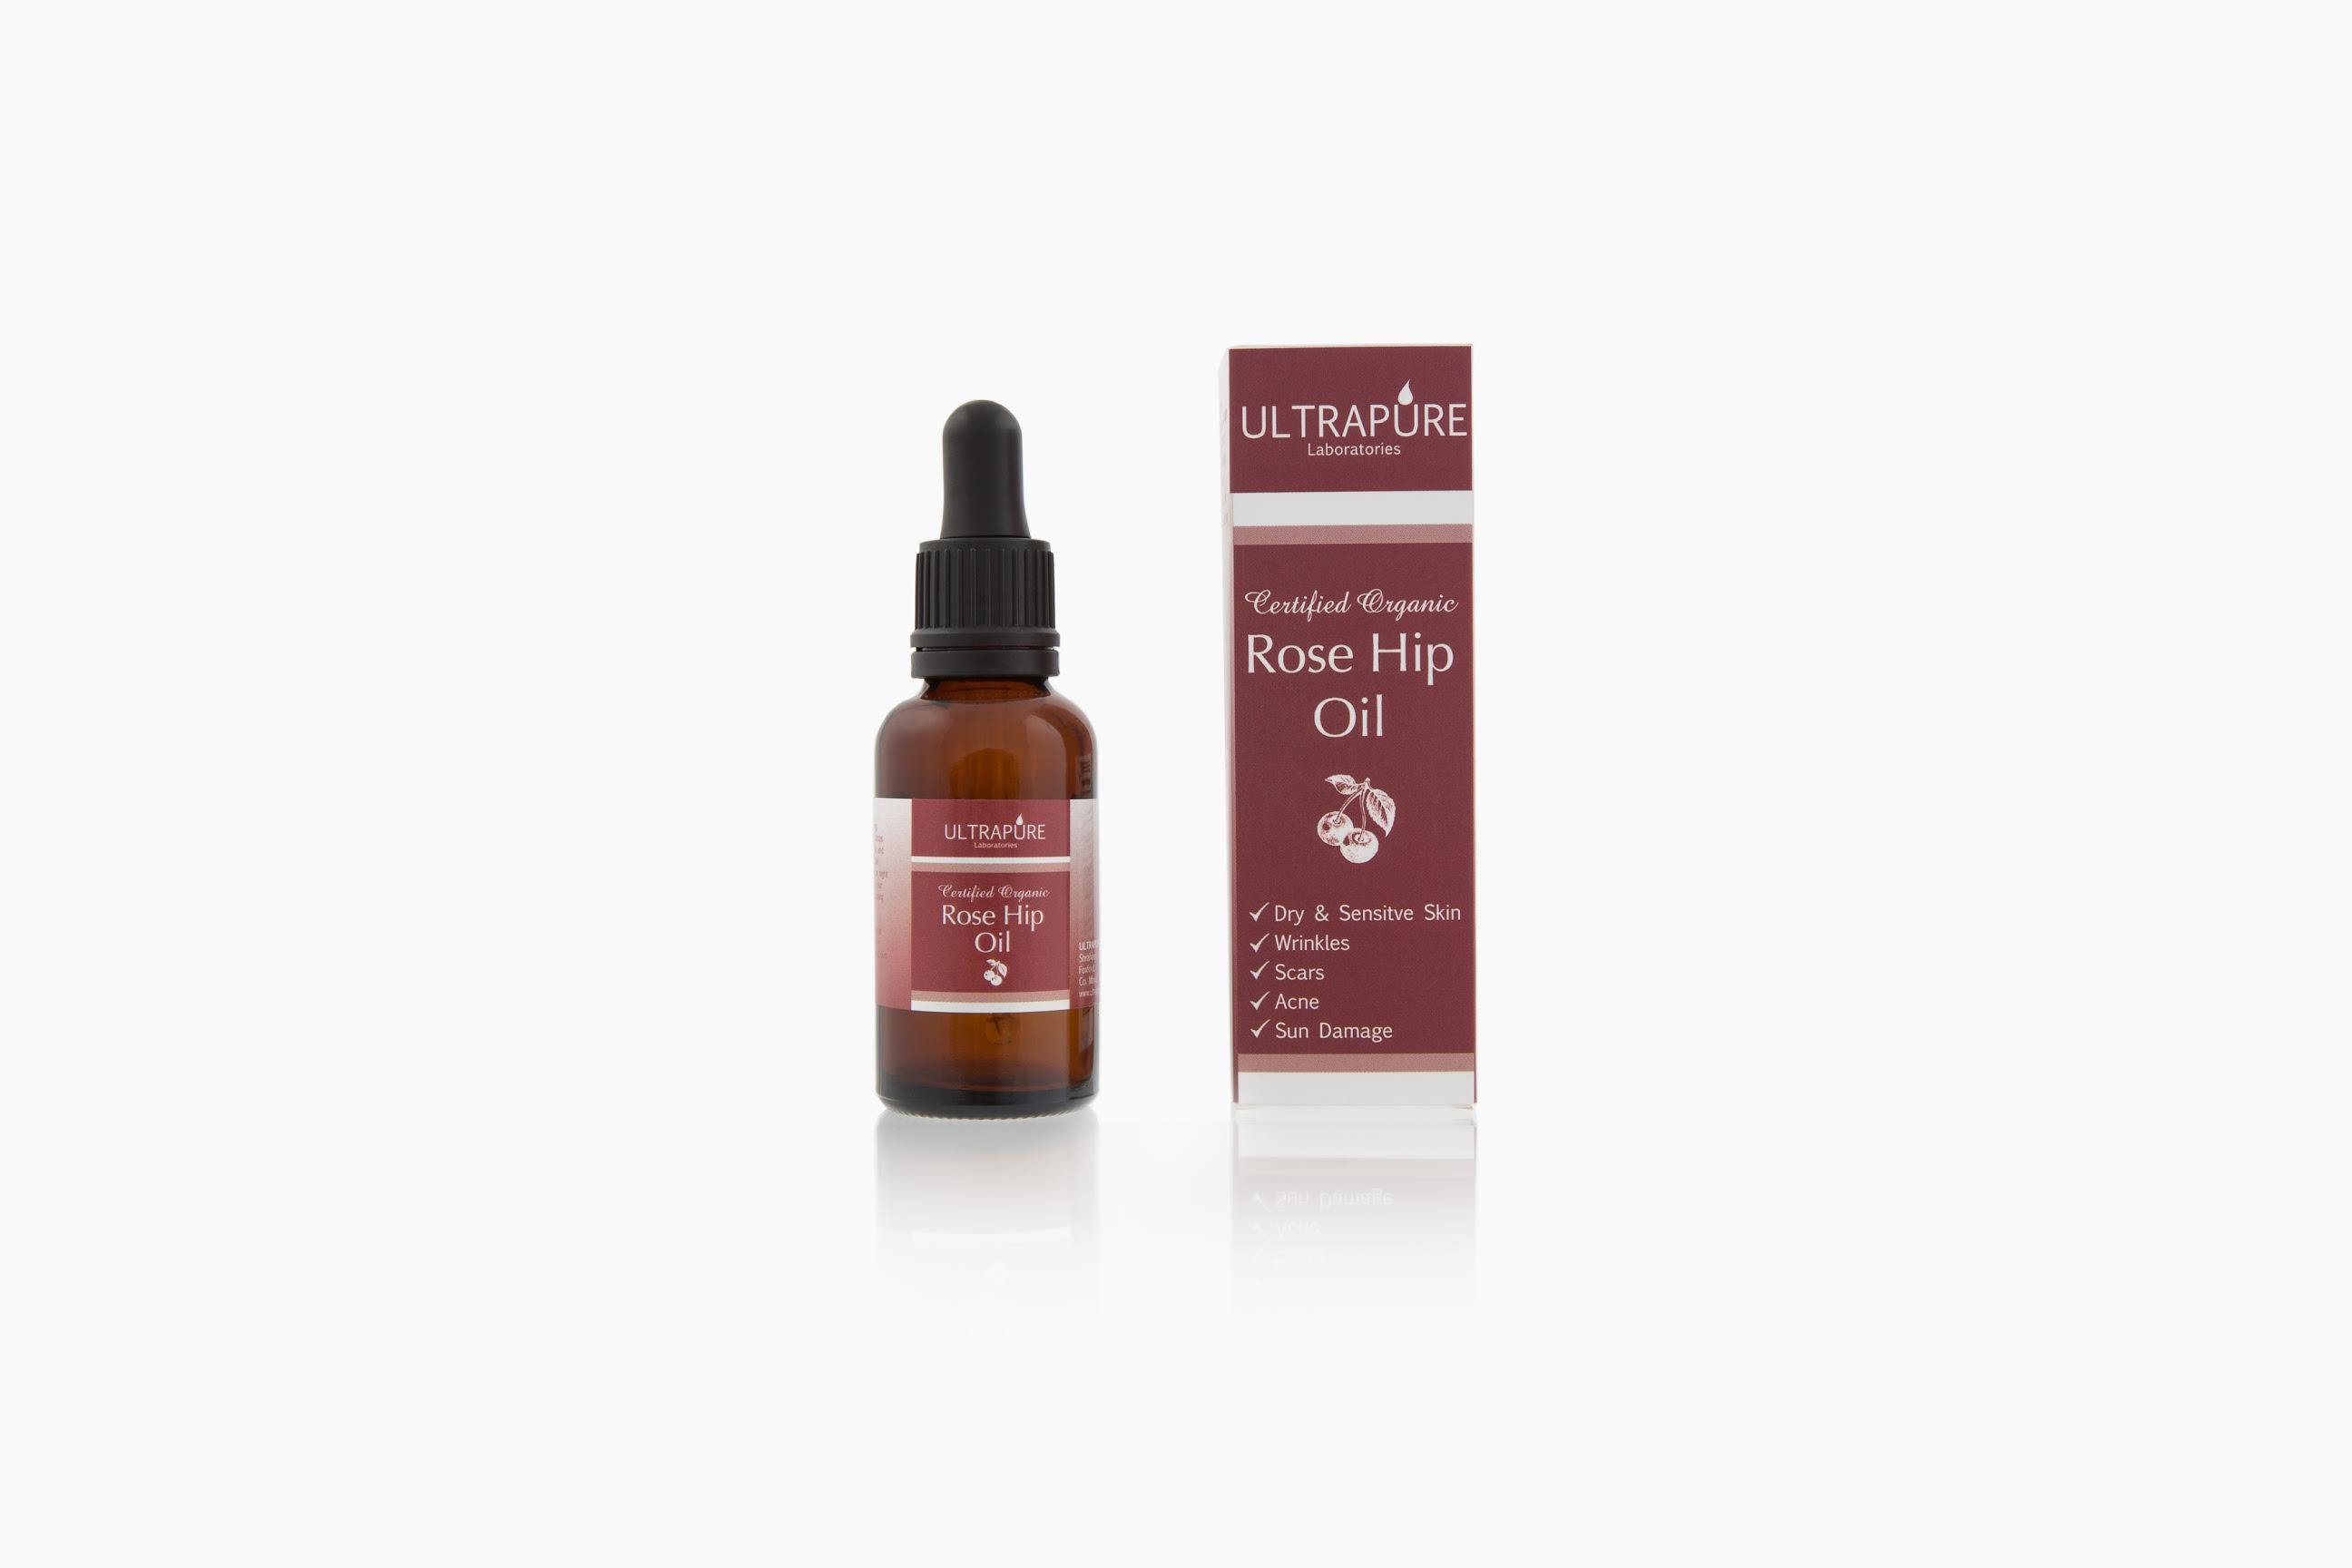 Our newest product Rose Hip Oil